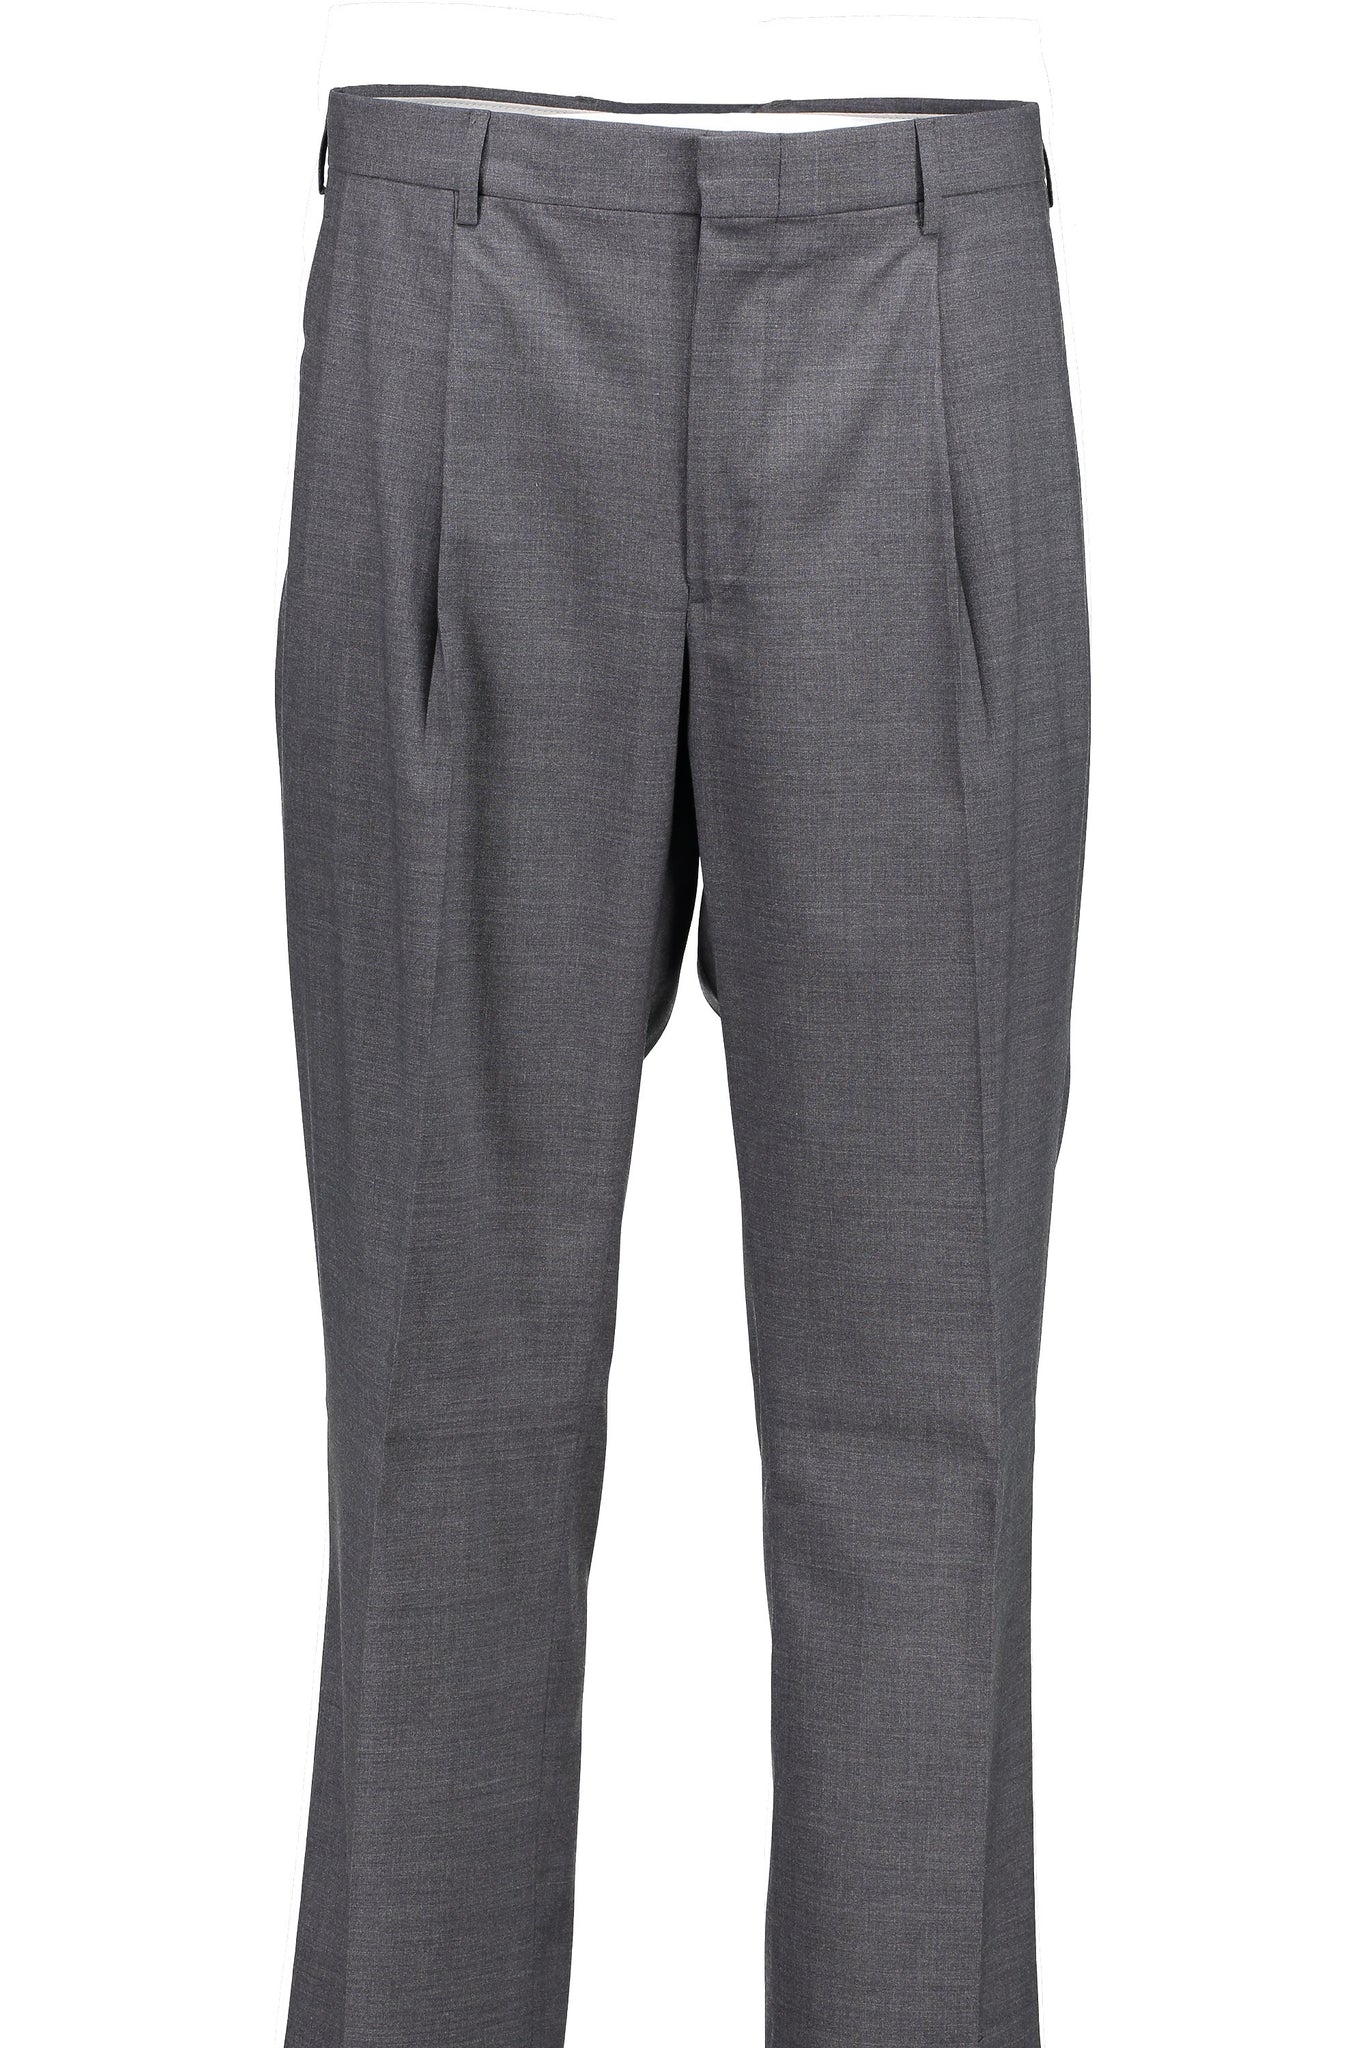 Classic Fit Grey H-Tech Wool Suit Separate Pleated Pant -  Hardwick.com